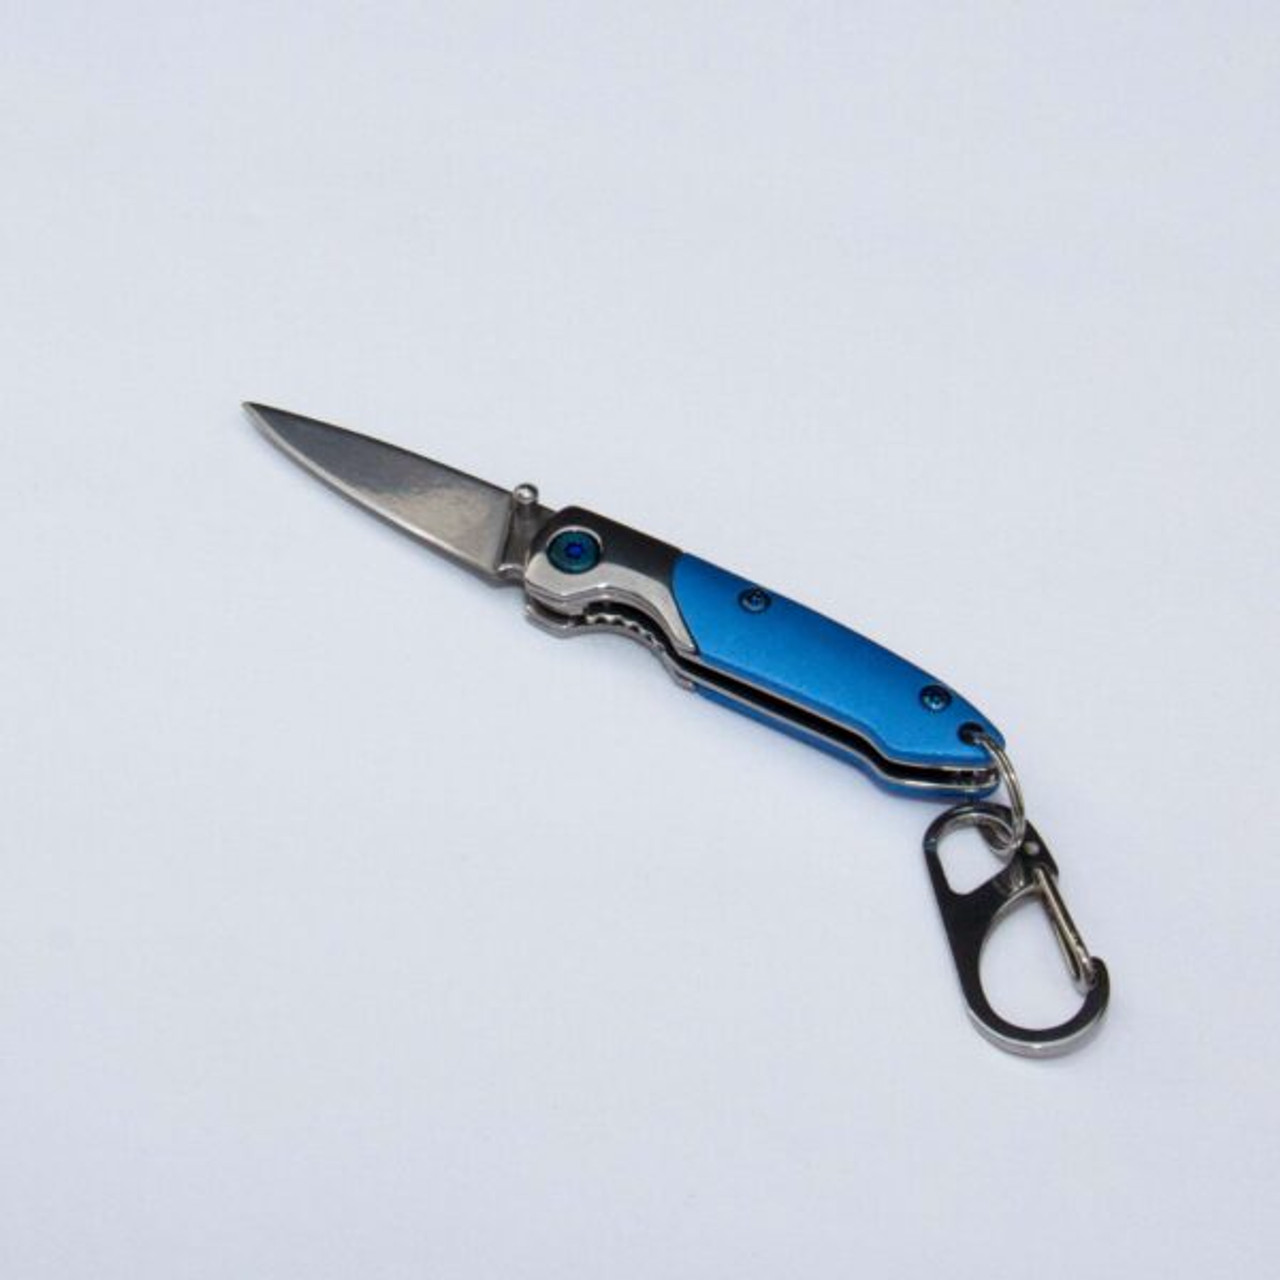 product image for Brighten Blades Blue Oyster Cult BB-135 Aluminum Keychain Knife